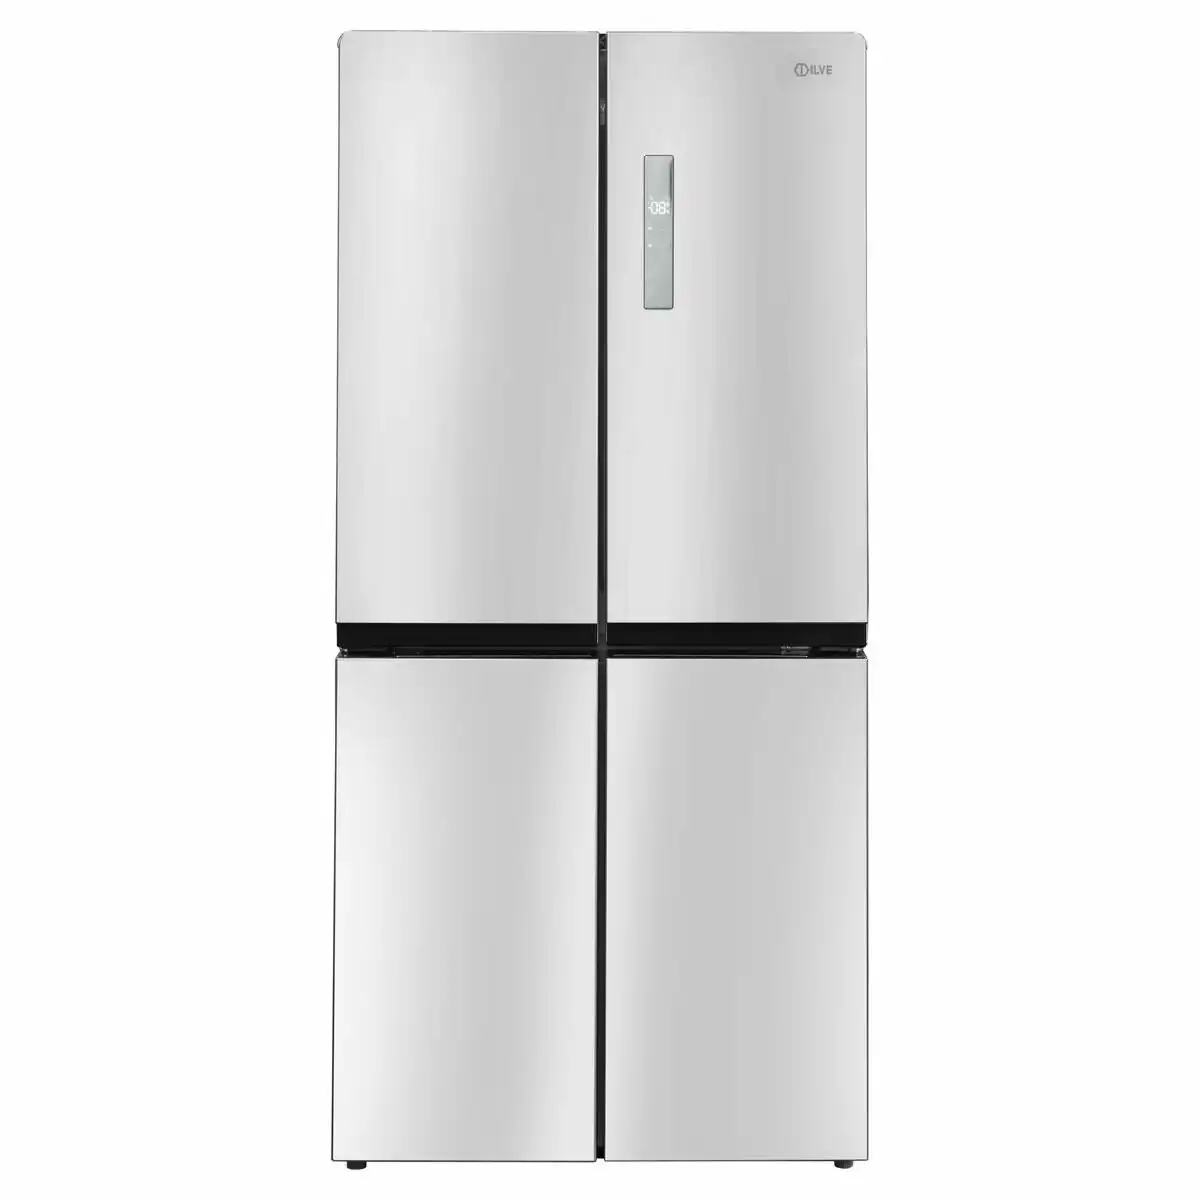 Ilve 482L French Door Refrigerator